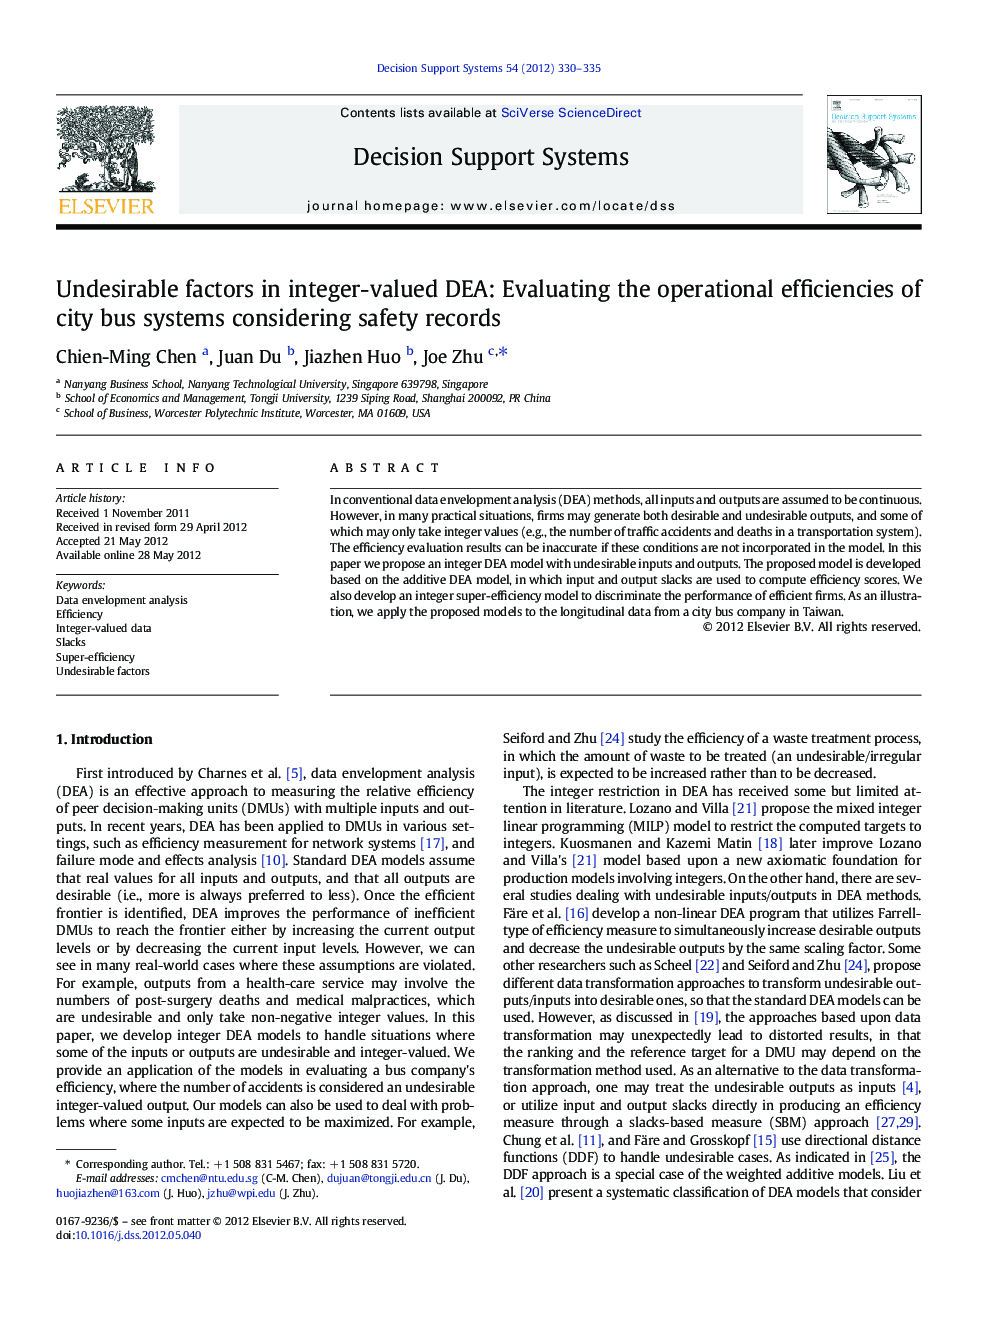 Undesirable factors in integer-valued DEA: Evaluating the operational efficiencies of city bus systems considering safety records